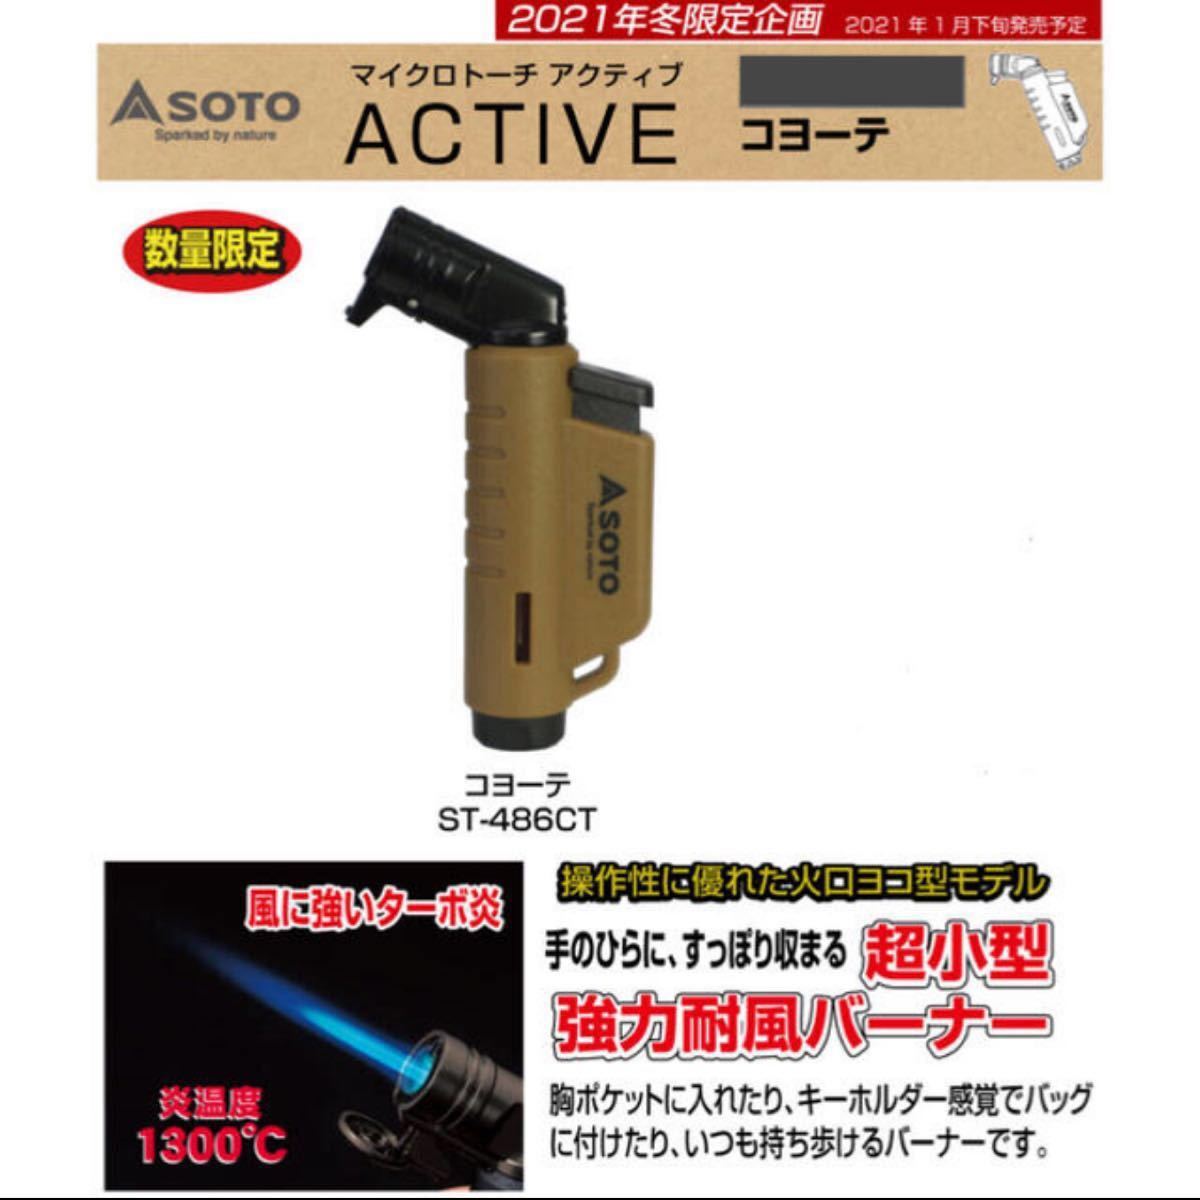 SOTO マイクロトーチ ACTIVE（アクティブ） コヨーテ ST-486CT